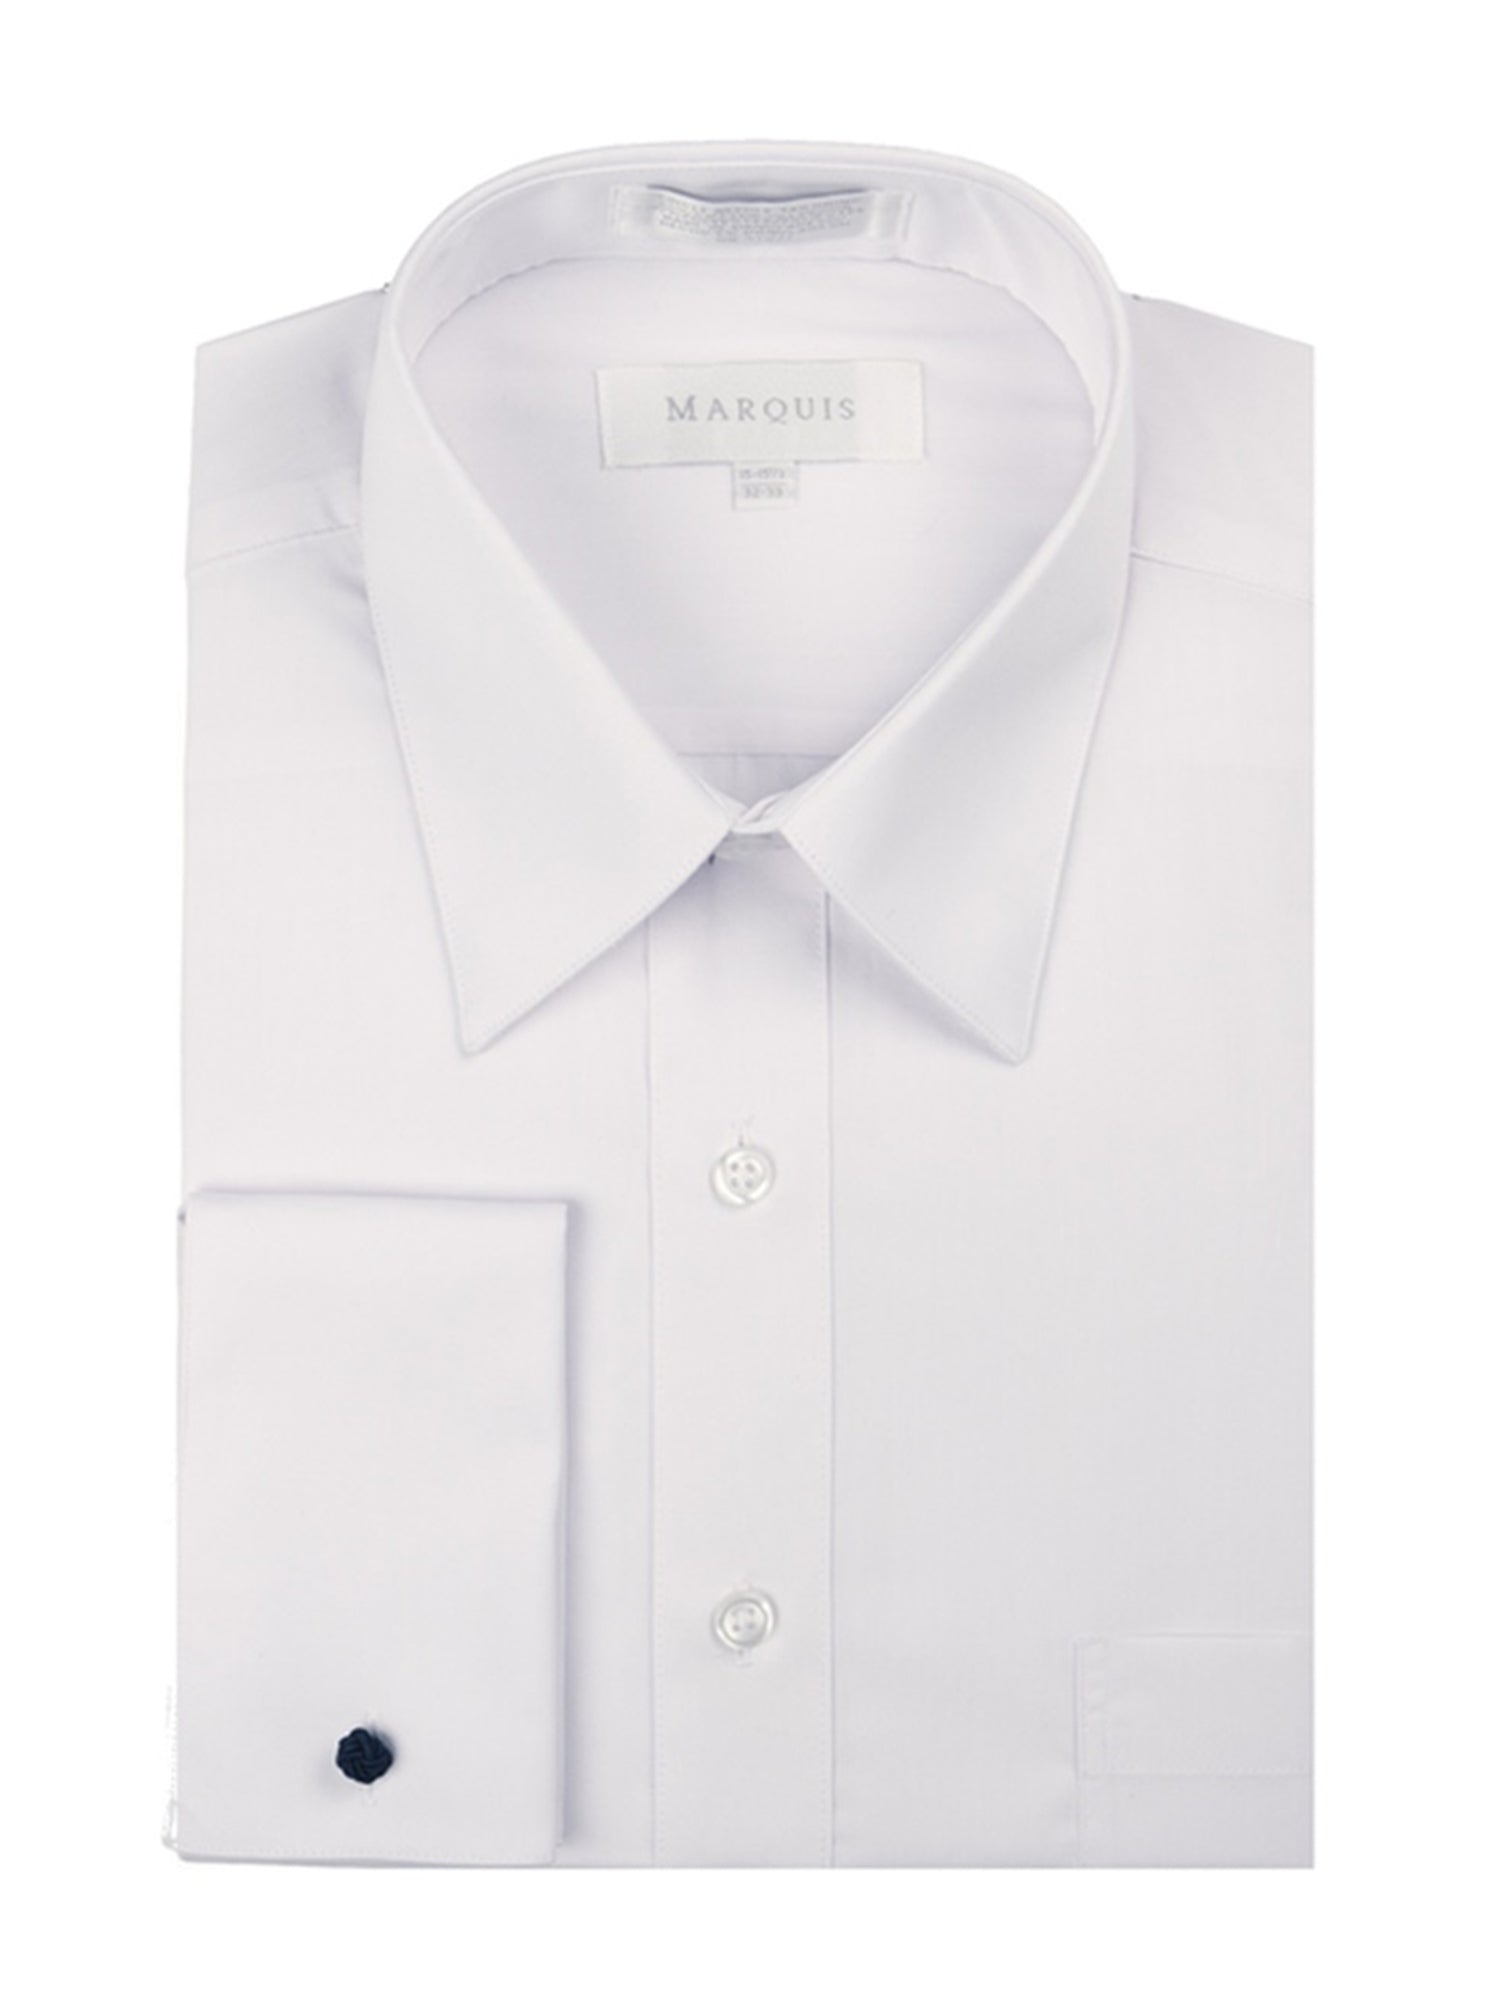 Marquis Men's Slim Fit French Cuff Dress Shirt - Cufflinks Included French Cuff Dress Shirt Marquis White 14.5 Neck 32/33 Sleeve 